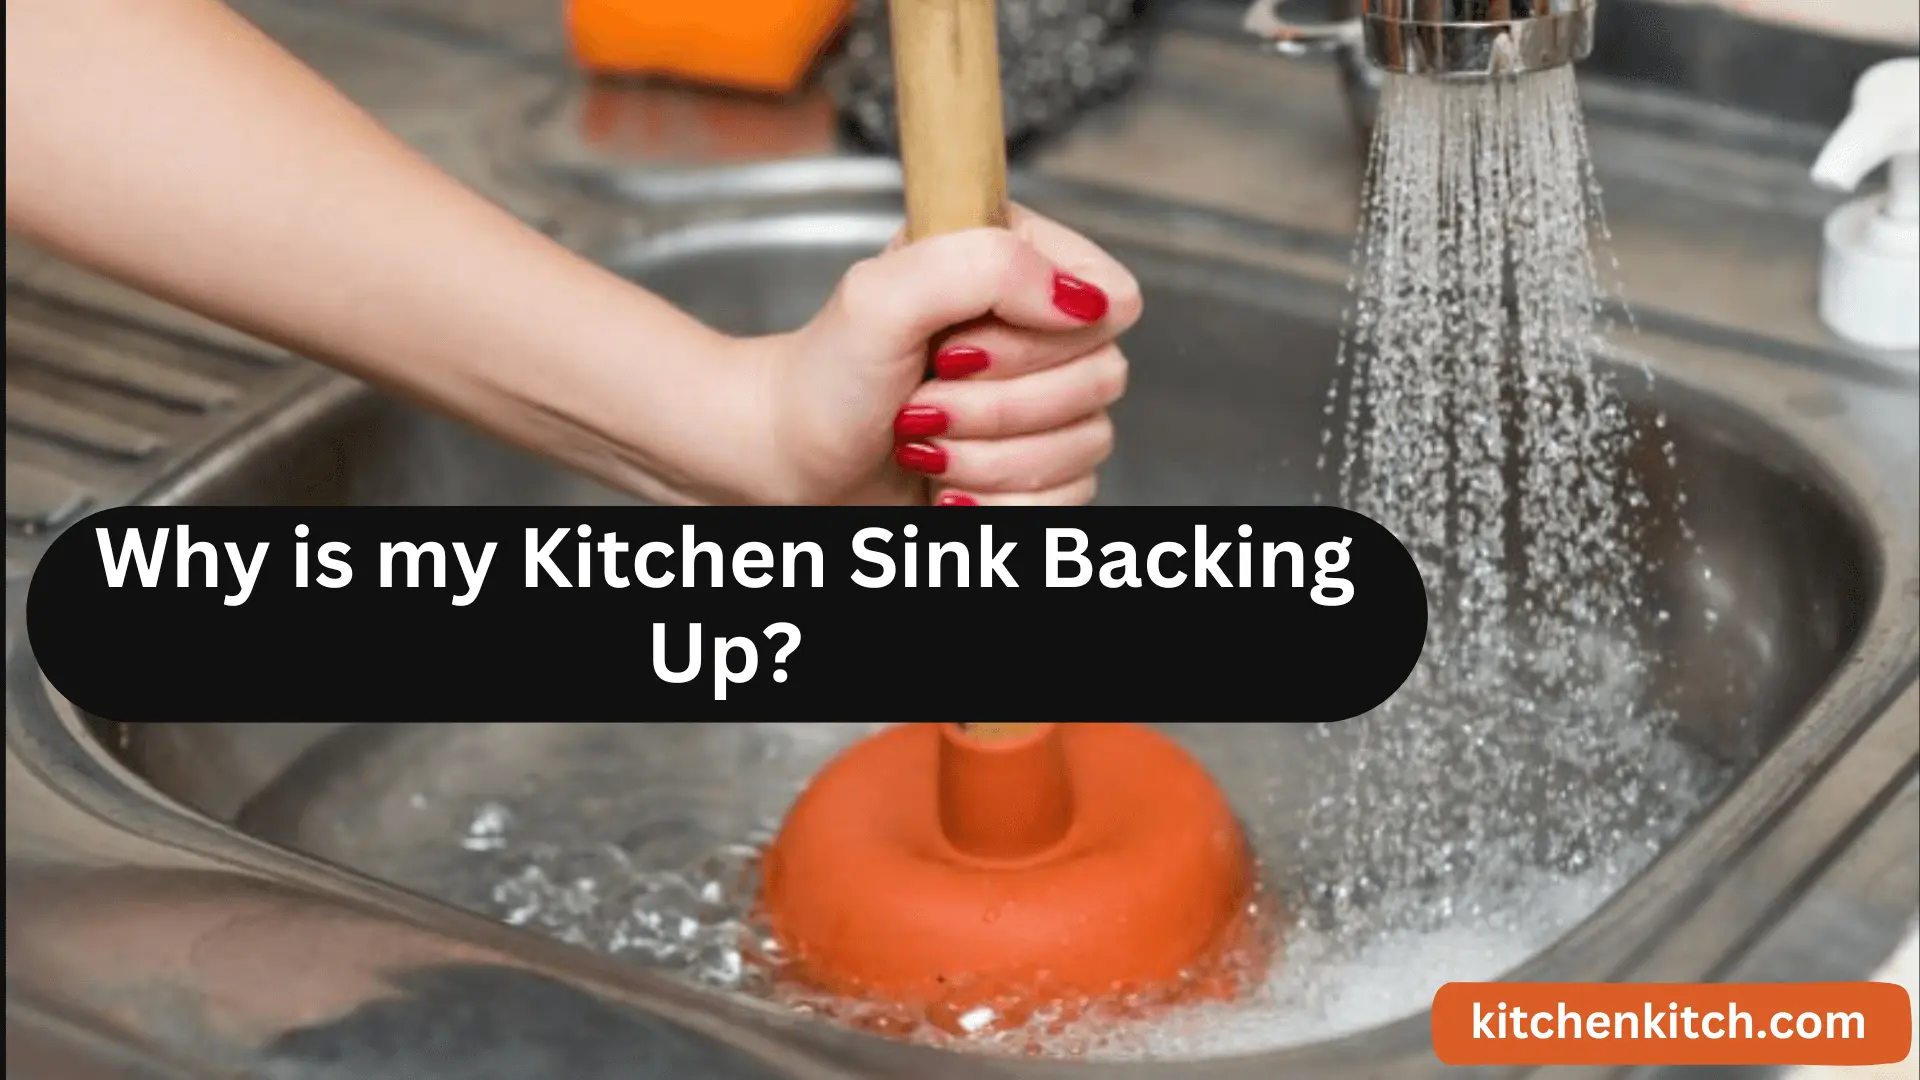 Why is my Kitchen Sink Backing Up?